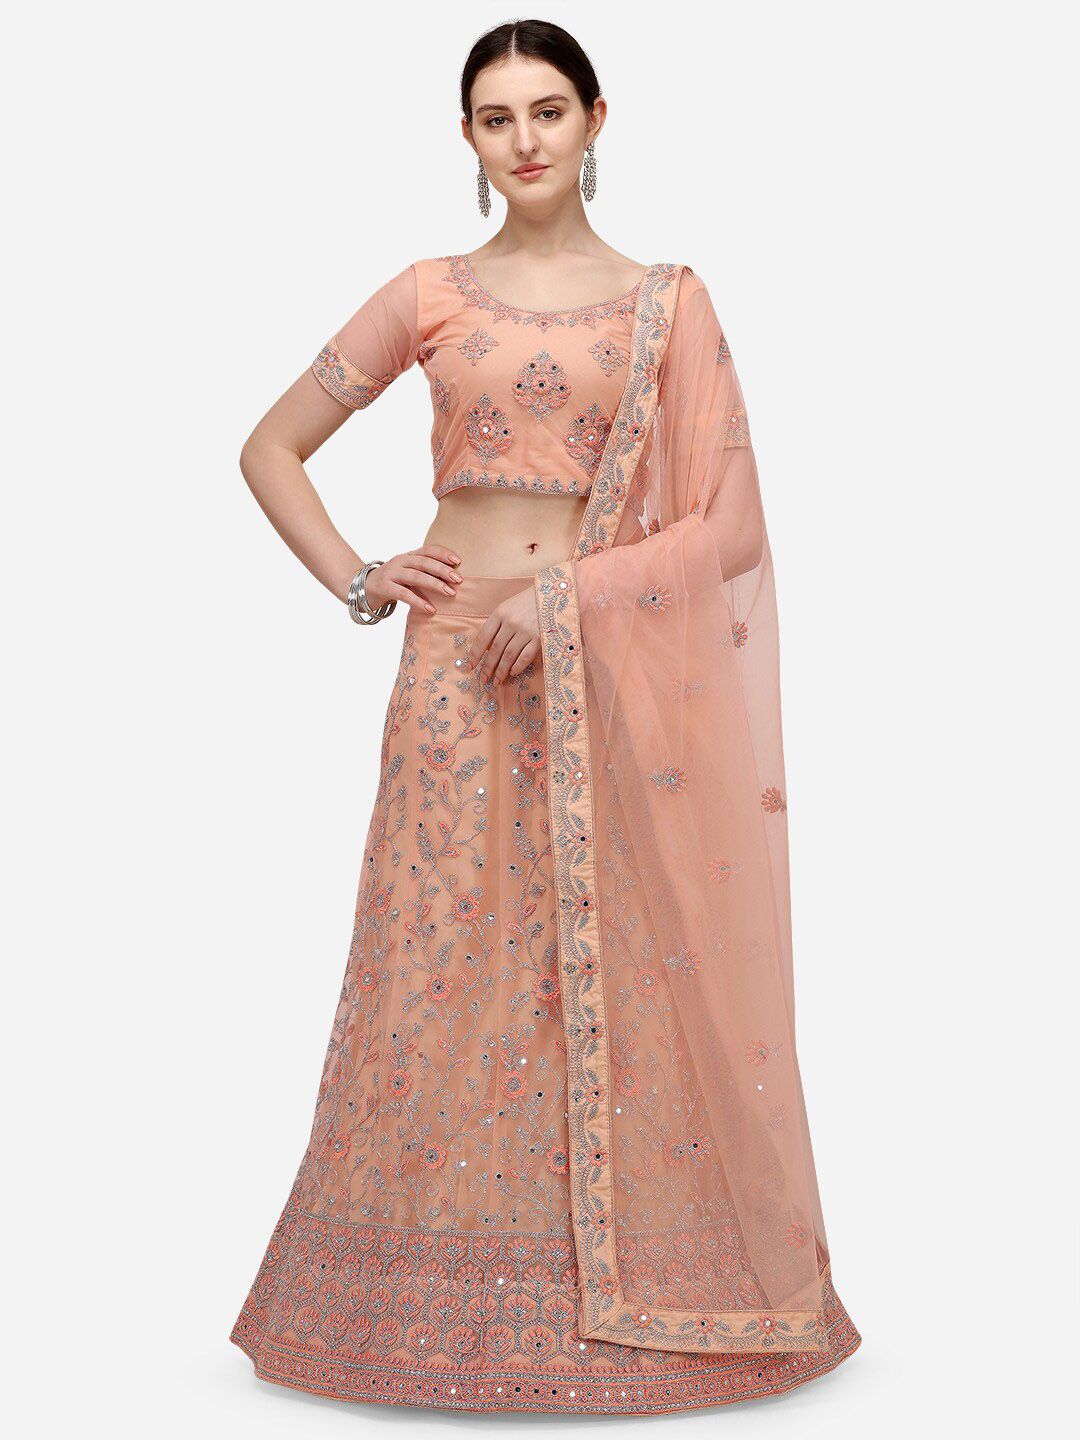 VRSALES Peach-Coloured & Silver-Toned Embroidered Mirror Work Semi-Stitched Lehenga & Unstitched Blouse With Price in India